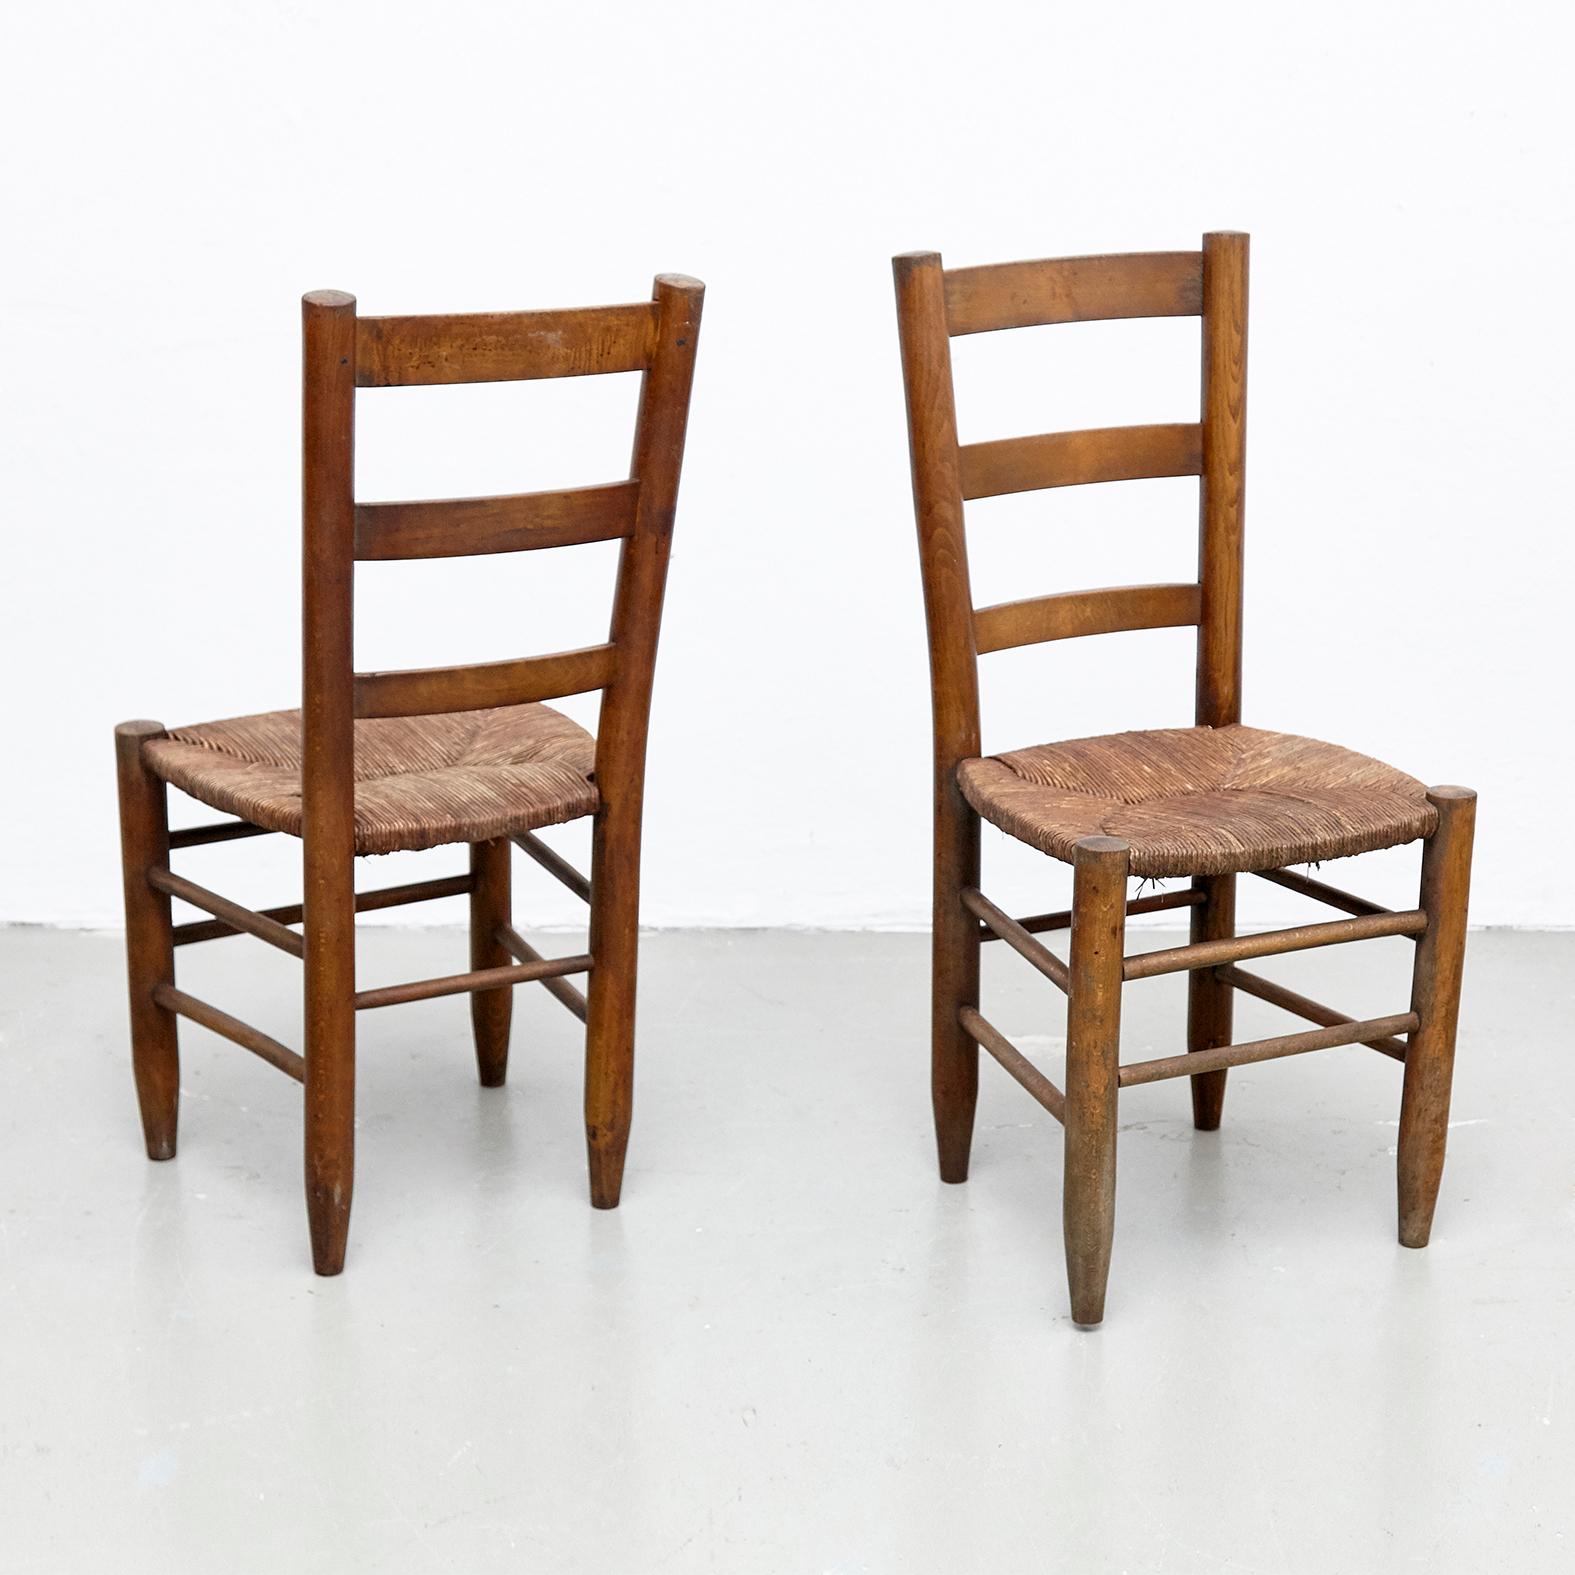 Pair of dining chairs, model Meribel, designed by Charlotte Perriand, circa 1950.

Solid wood base and legs, and rush seat.

In good original condition, with minor wear consistent with age and use, preserving a beautiful patina. The seats rush